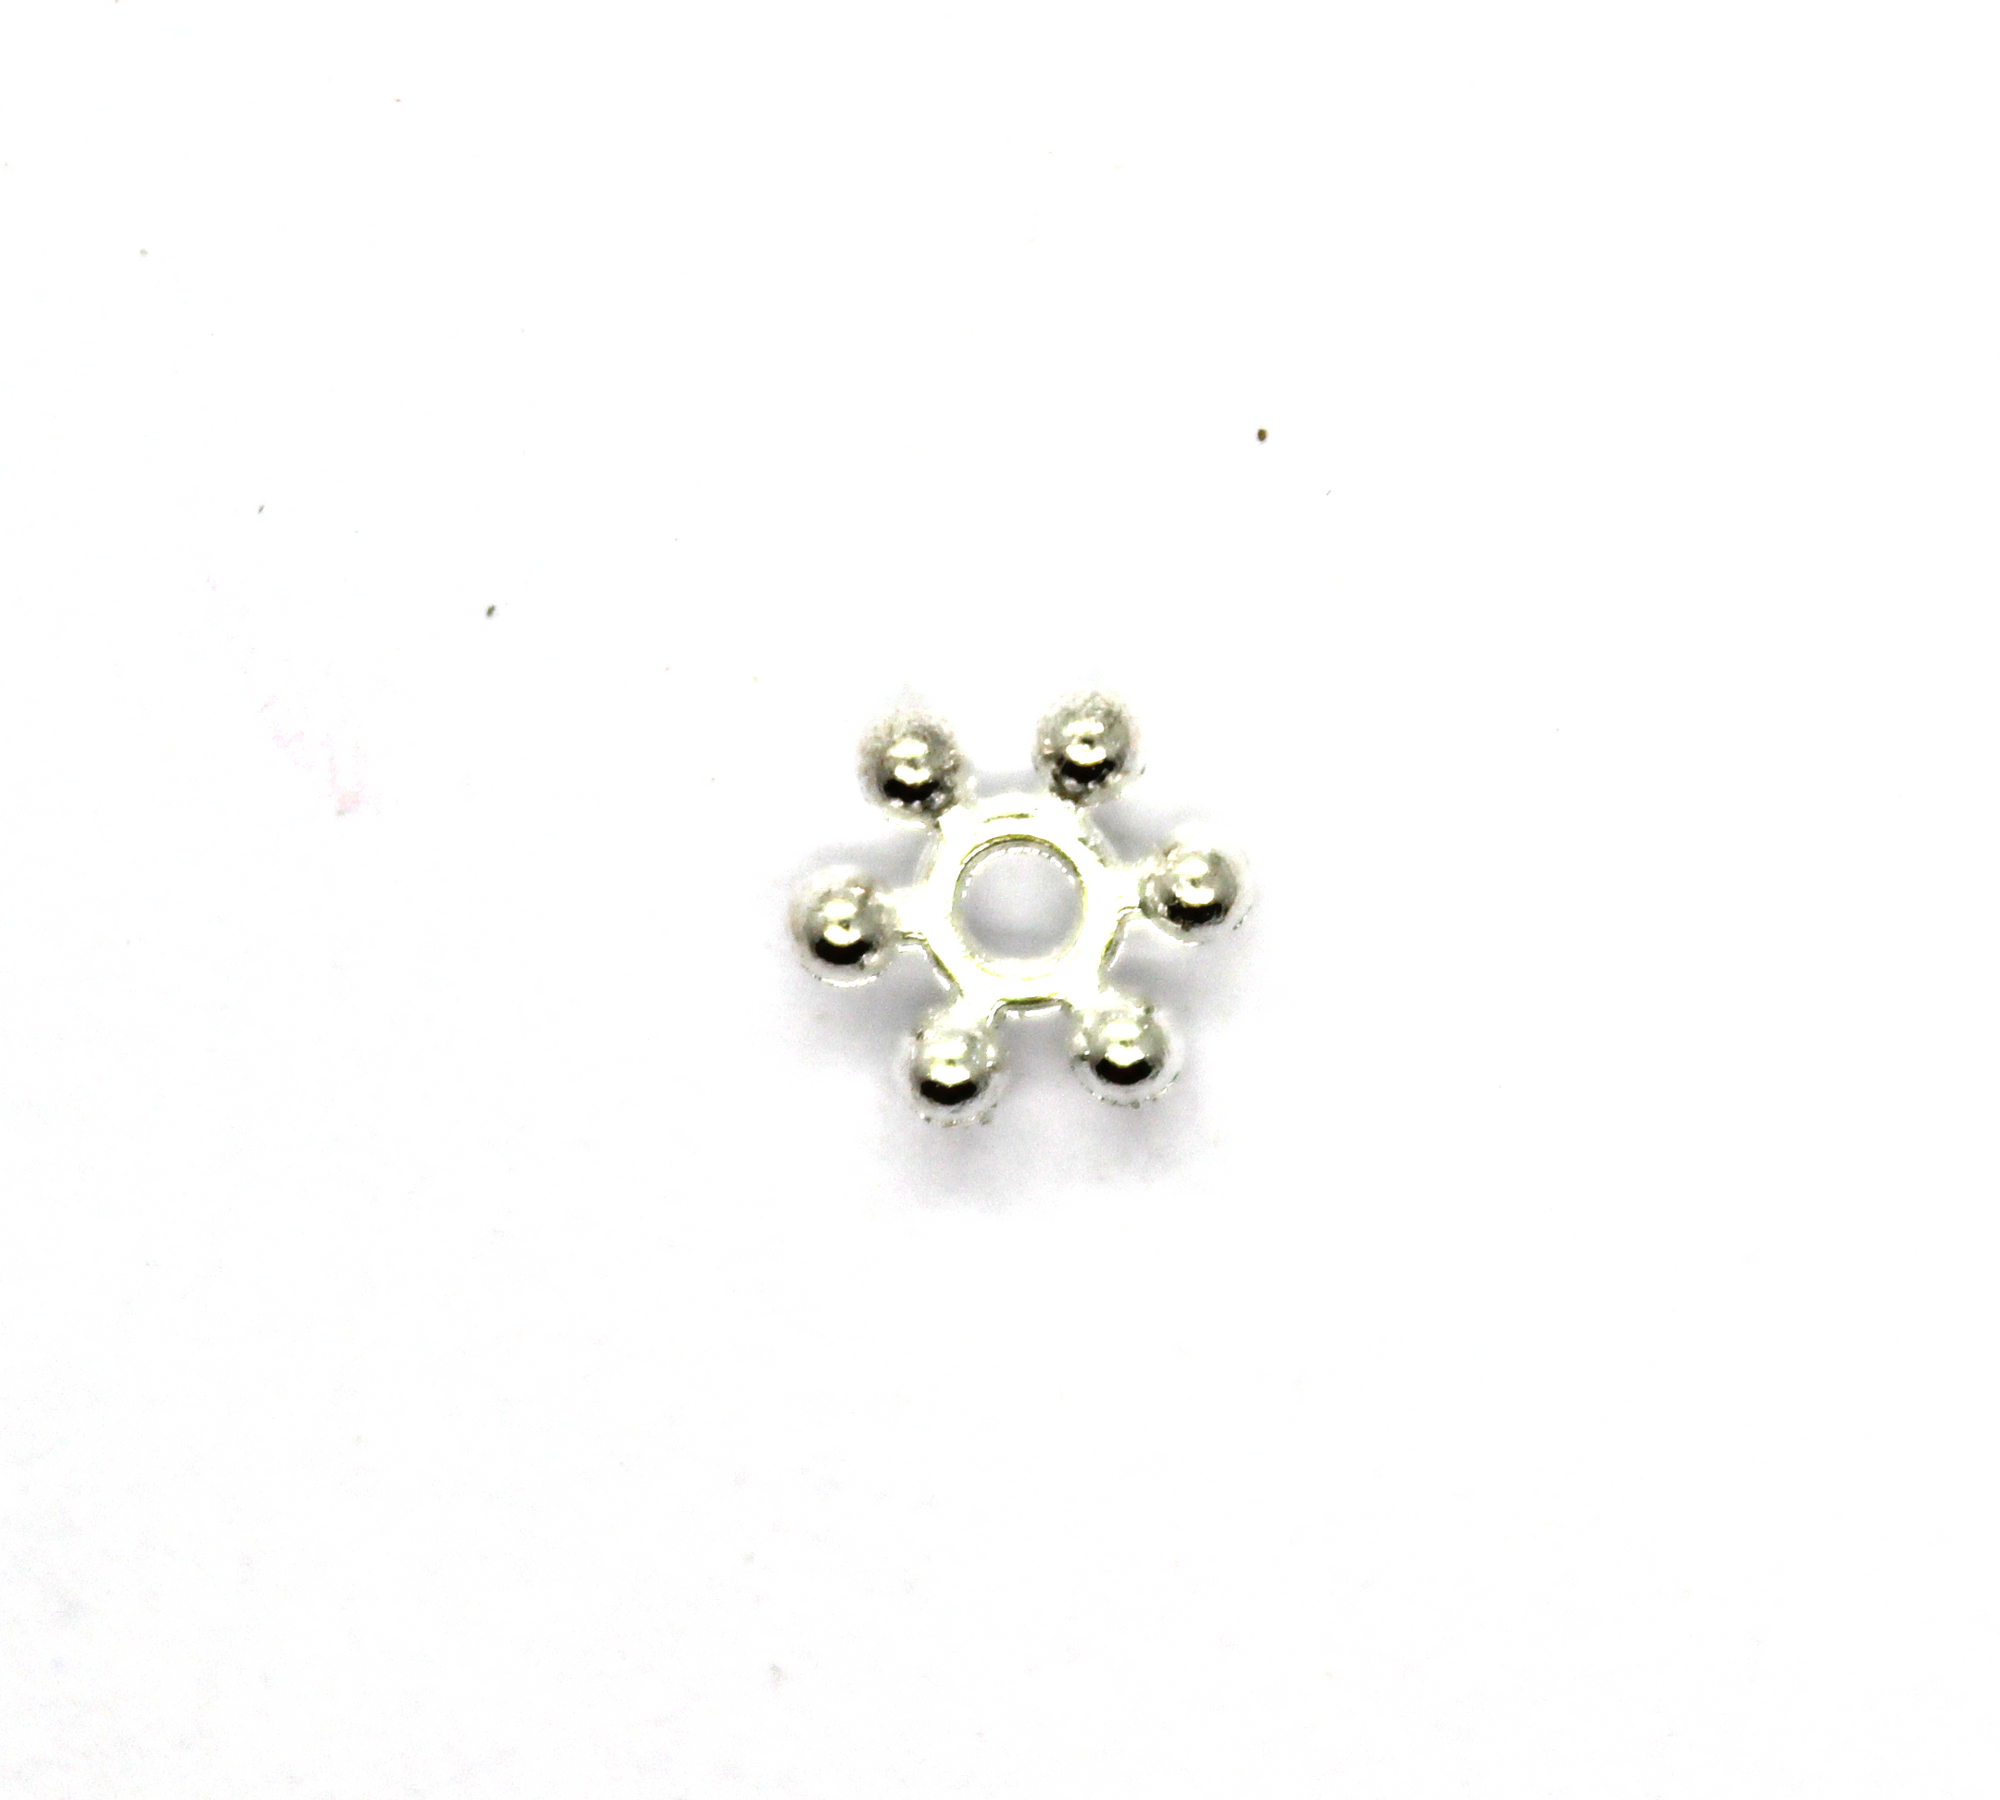 Spacers, Snowflake Spacer, Bright Silver, Alloy, 6mm x 6mm, Sold Per pkg of 70